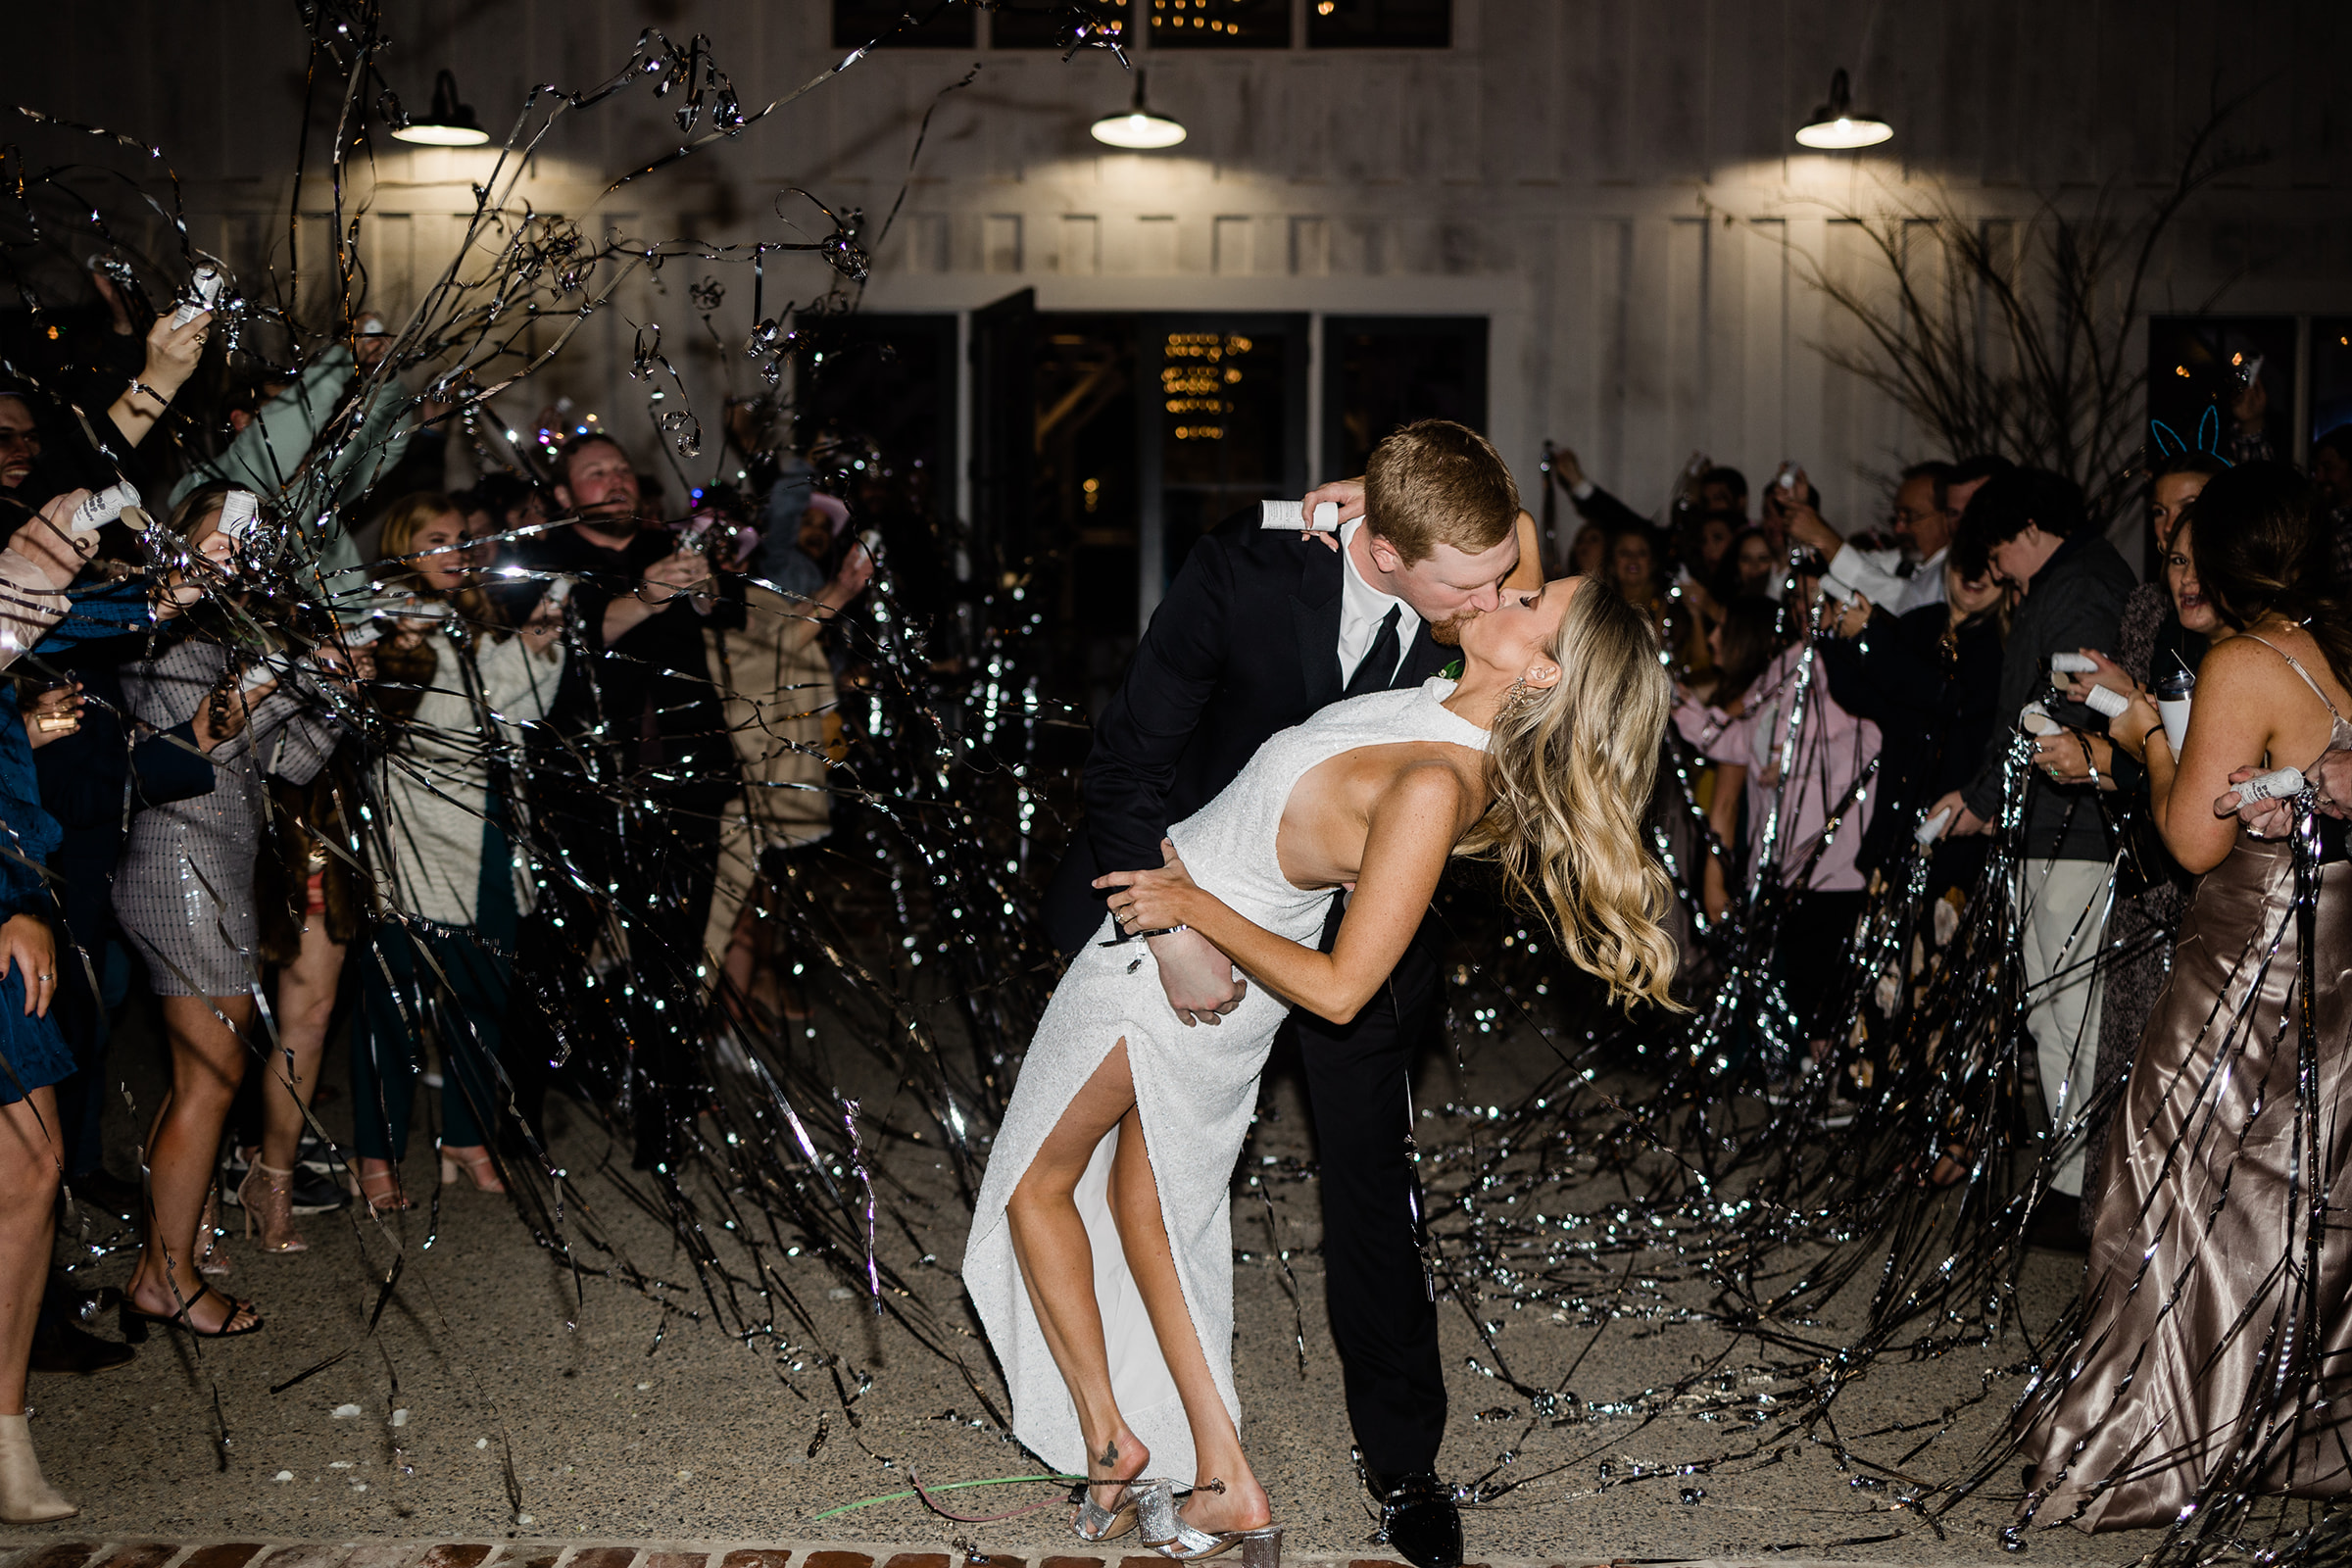 A explosive image of a bride and groom kissing, while the groom dips his bride and their guests spray streamers at them